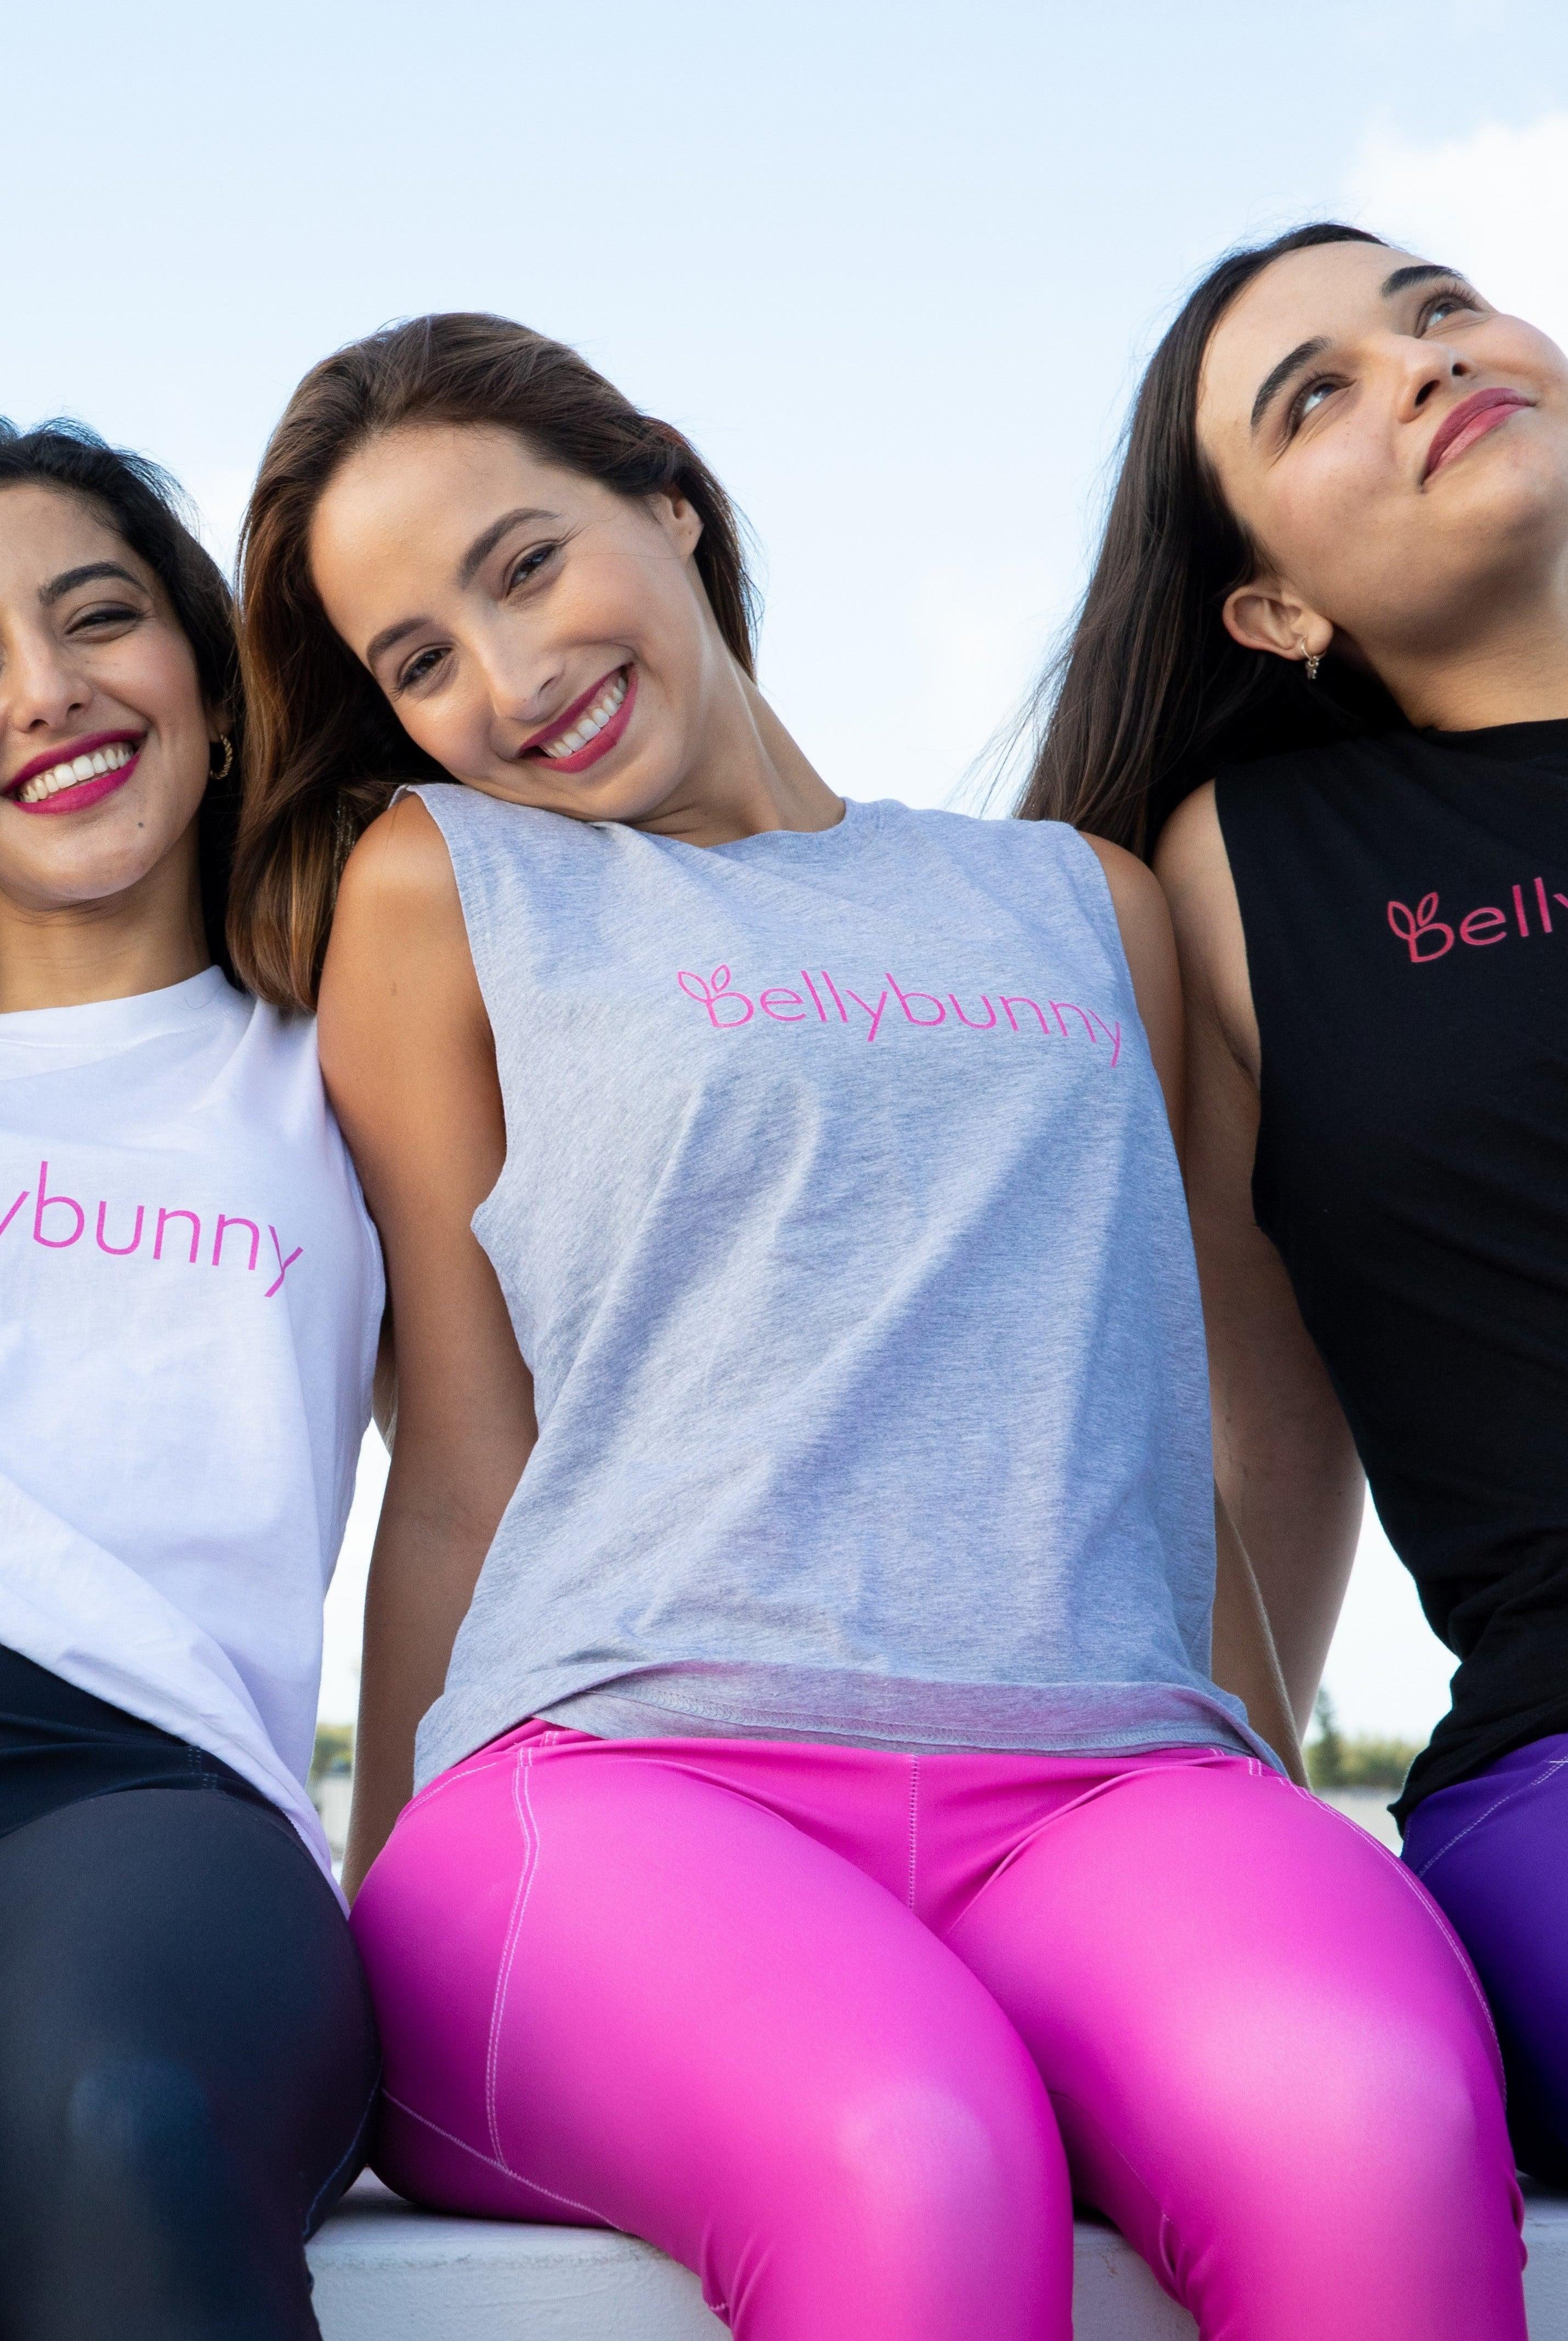 Bellybunny Muscle T-Shirt